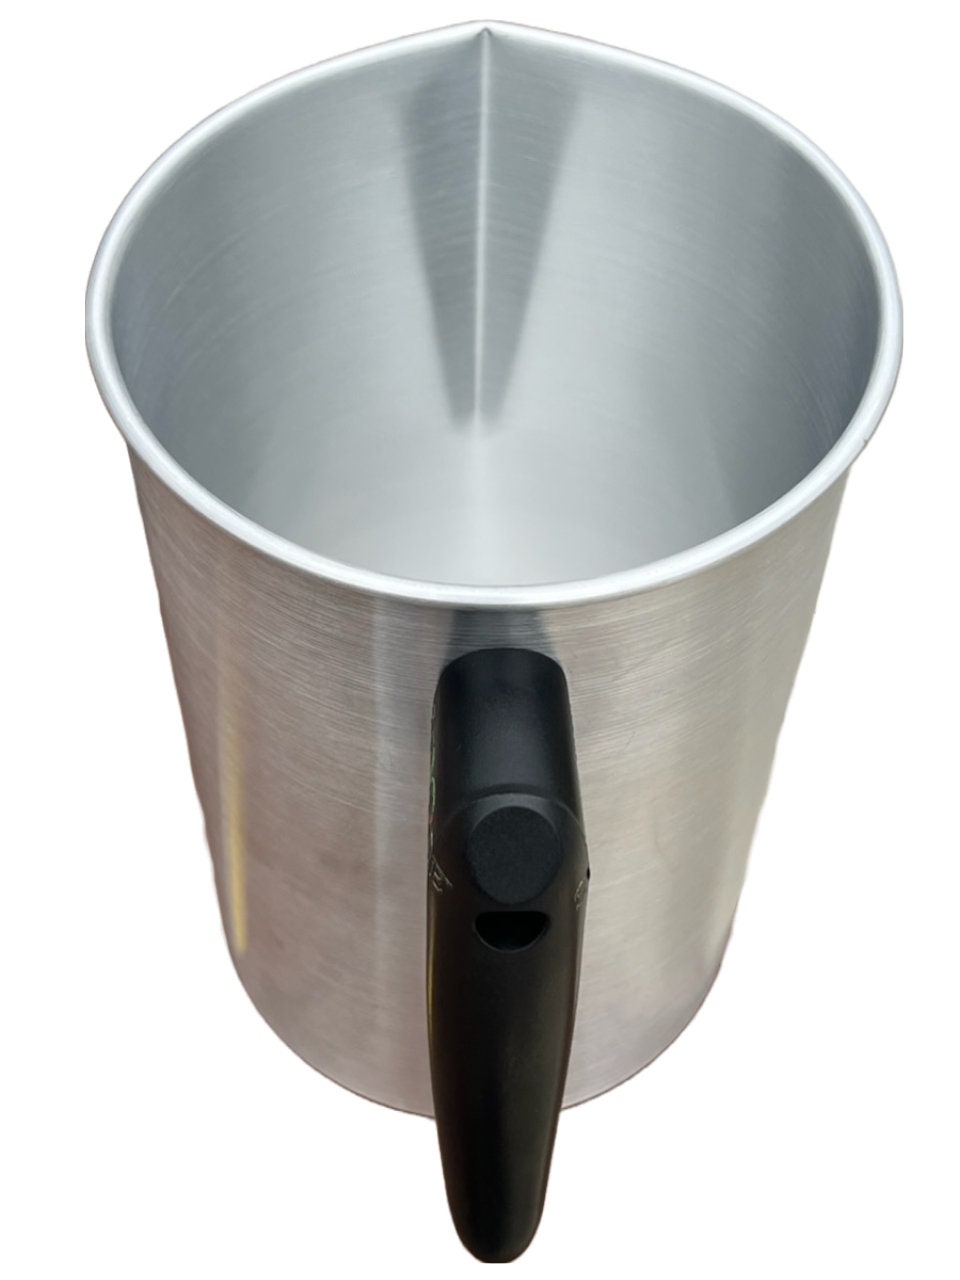 Wax Melter for Candle Making, Soylite Wax Melter is a Professional